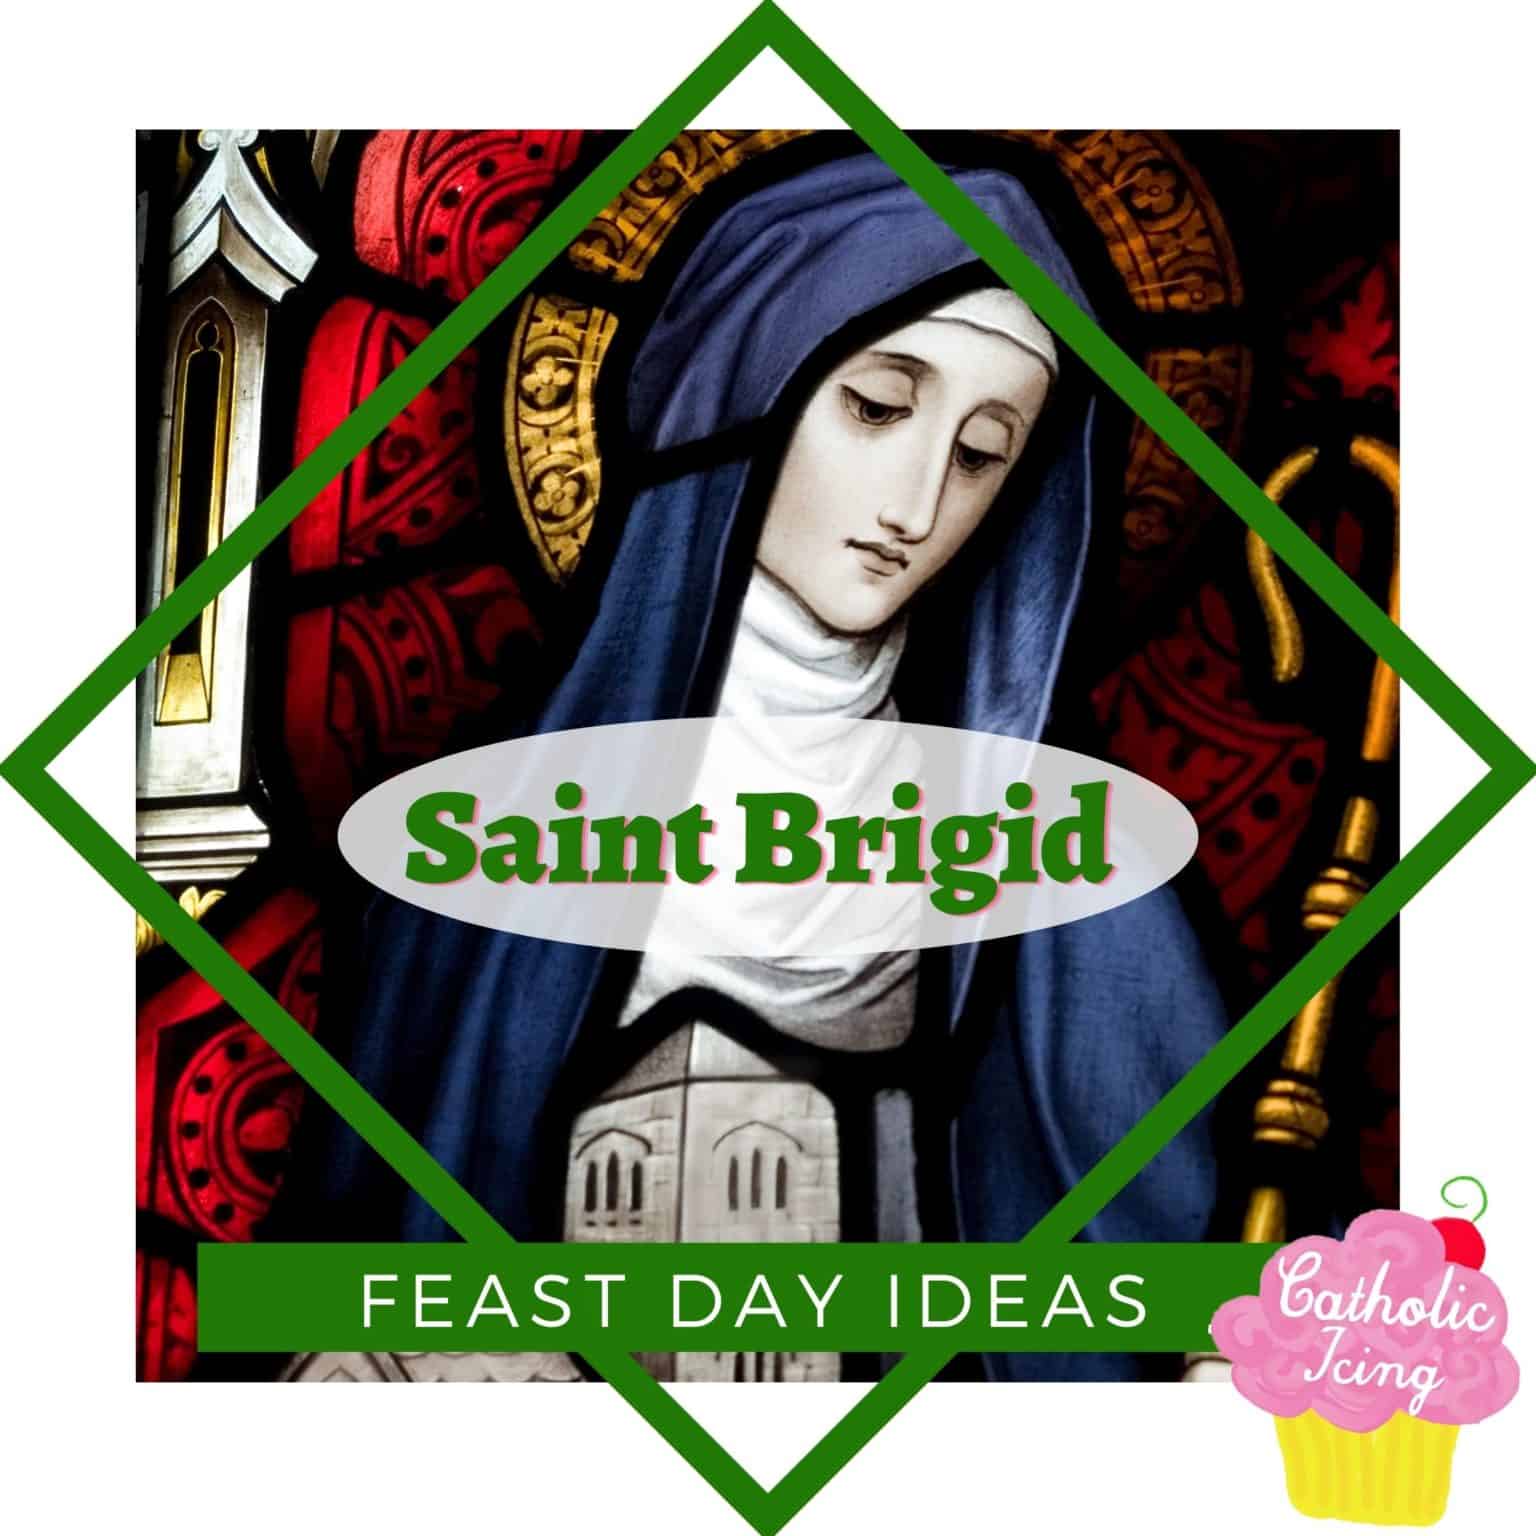 Celebrate St. Brigid’s Feast Day Traditions And Resources